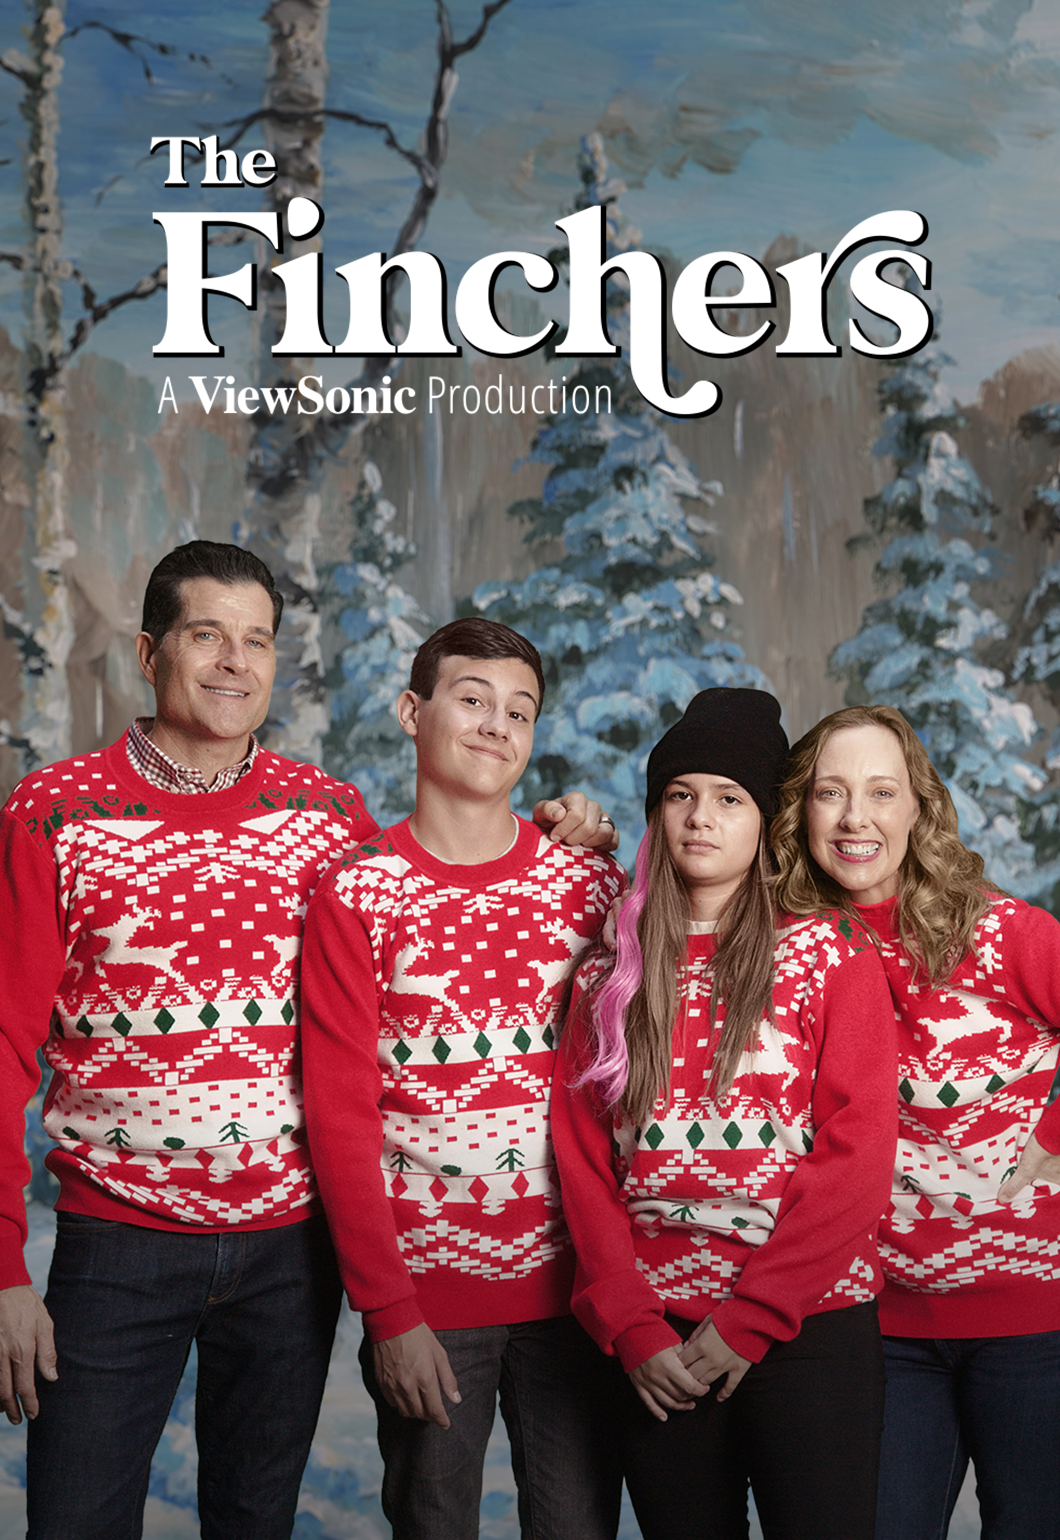 Finchers family in holiday sweaters with The Finchers logo